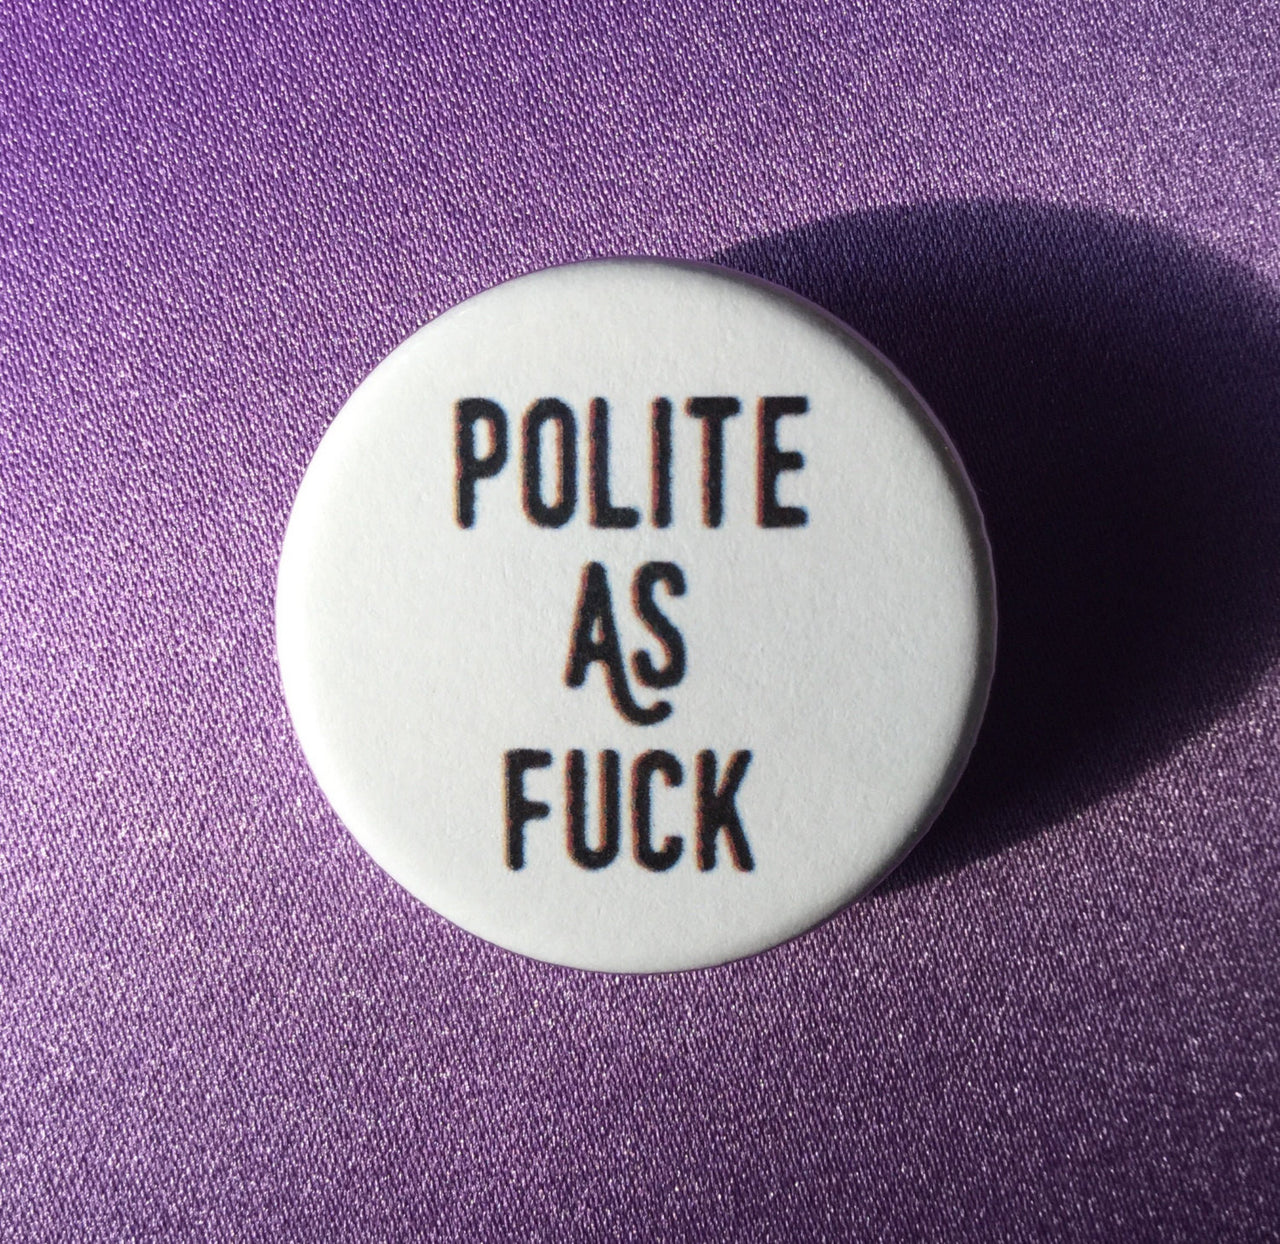 Polite as fuck button - Radical Buttons